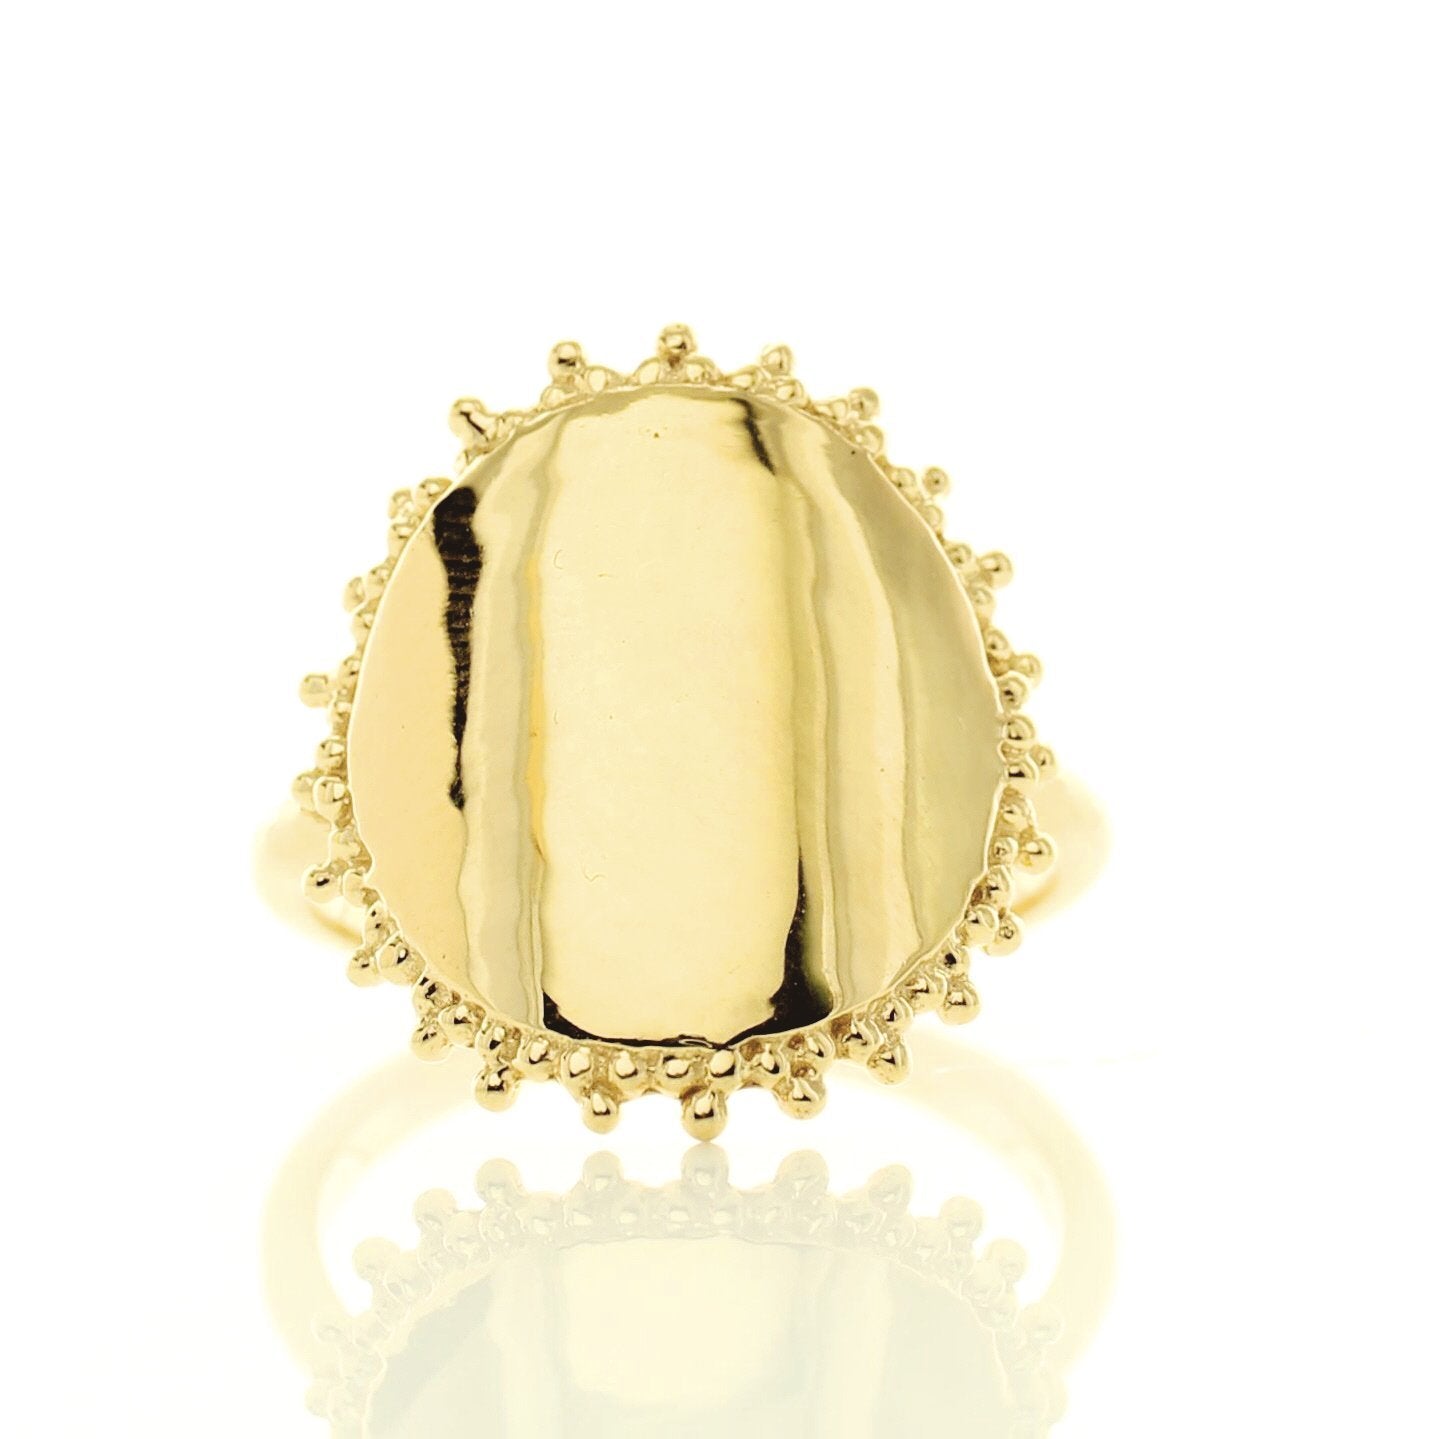 BELIEVE SOLEIL RING - GOLD - SO PRETTY CARA COTTER